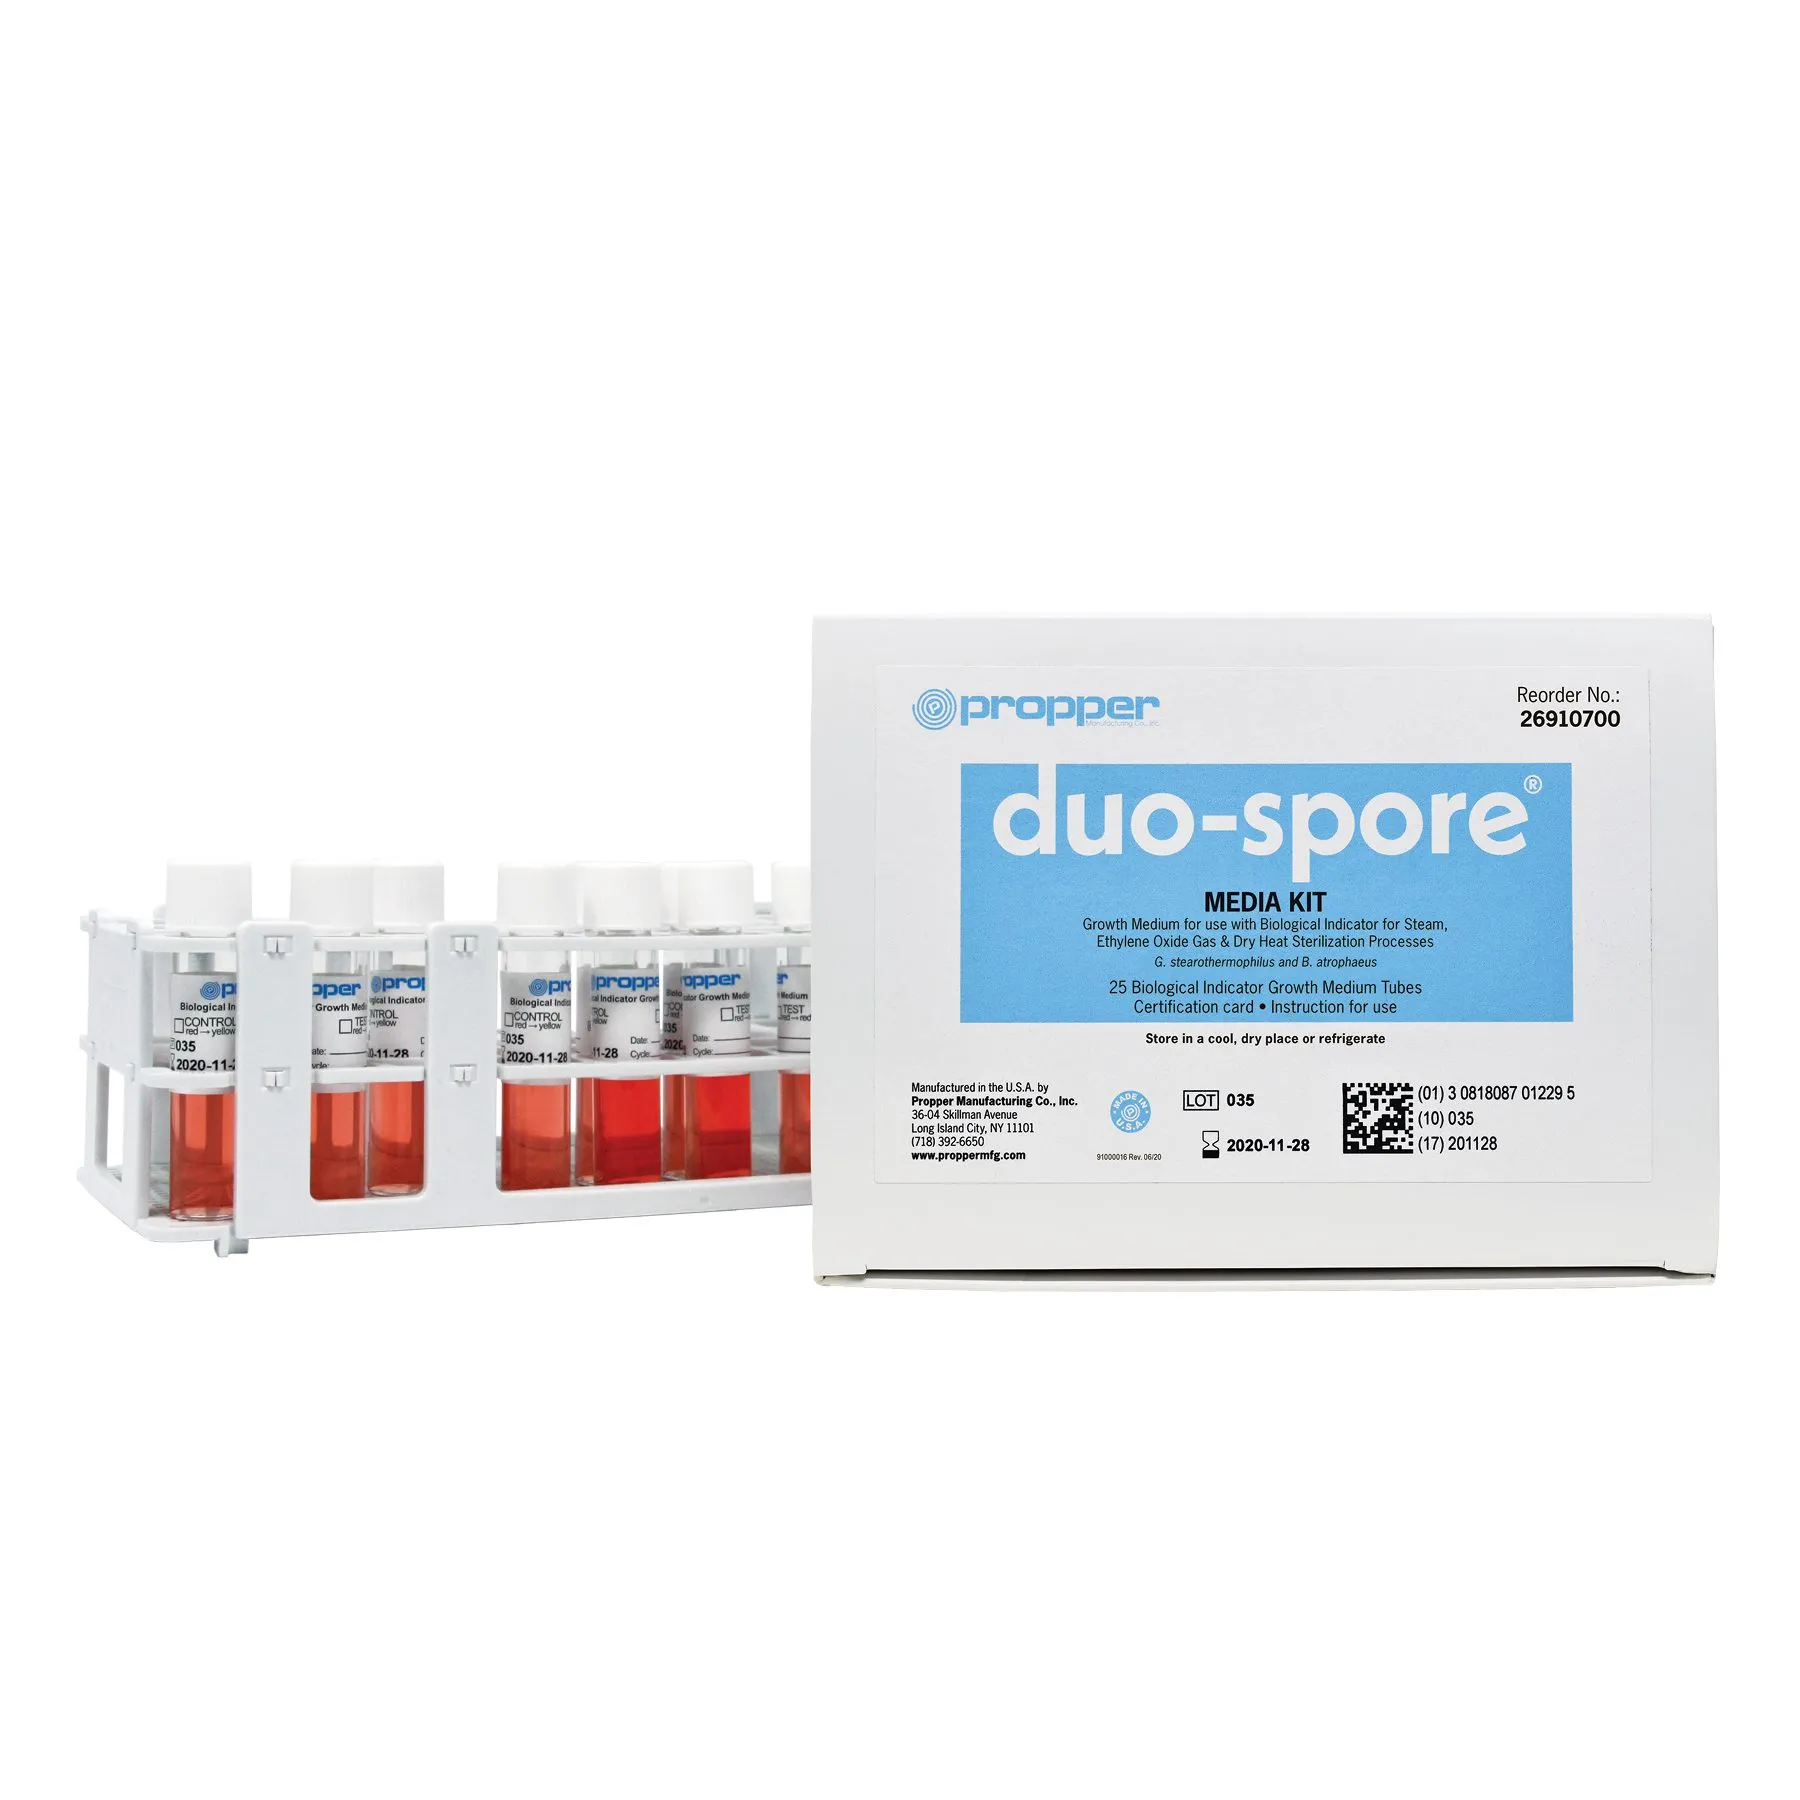 Propper - From: 26909600 To: 26909700 - Manufacturing Duo Spore Biological Indicator Test Strip